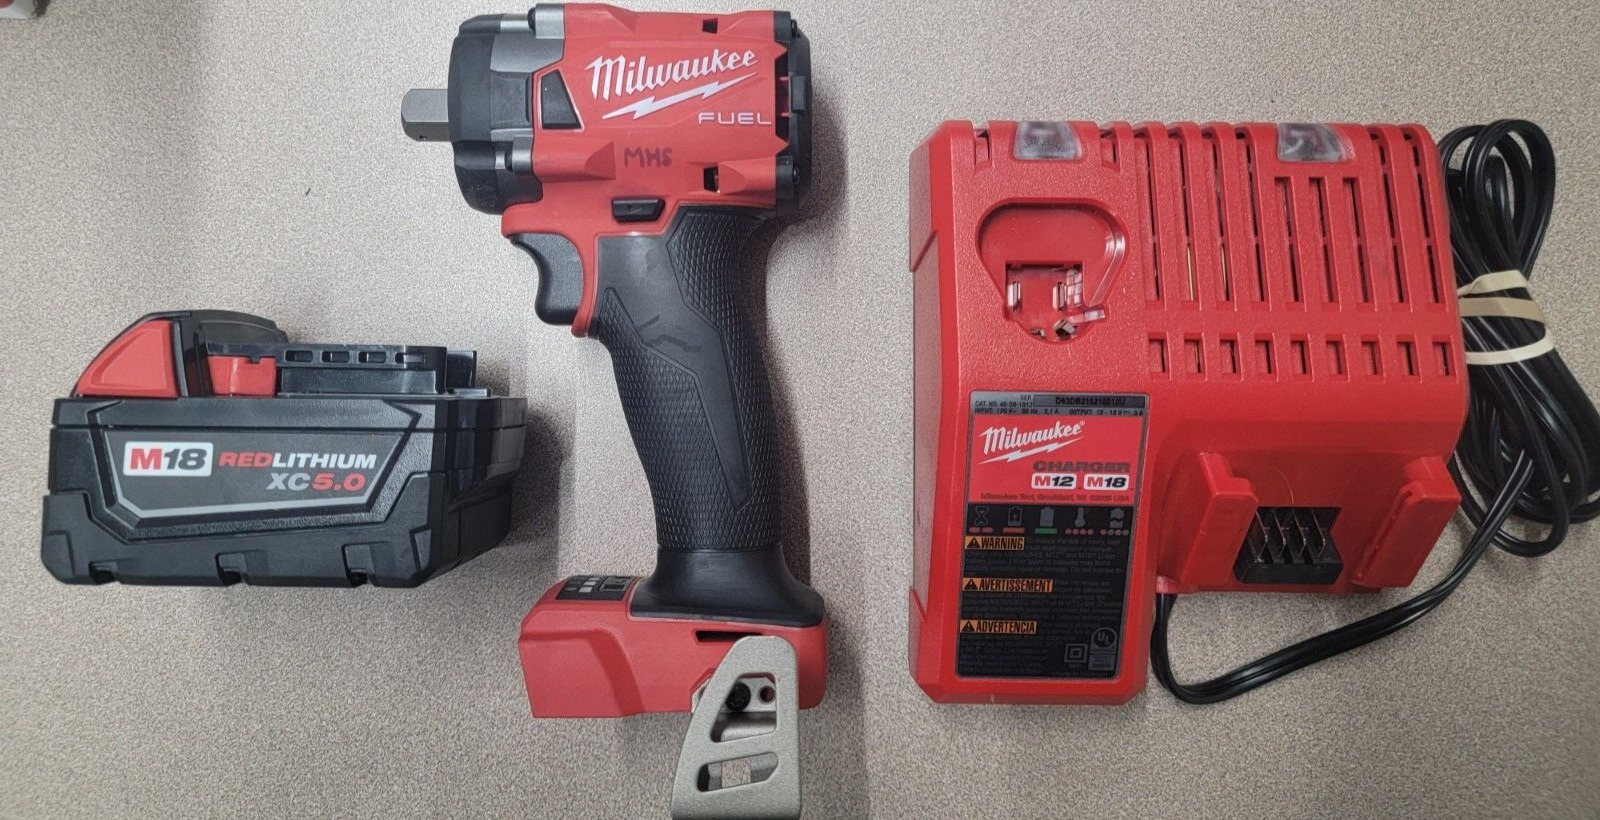 Milwaukee 2855p-20 M18  1/2" Square Pin Impact Wrench W/ 5 Ah Battery & Charger